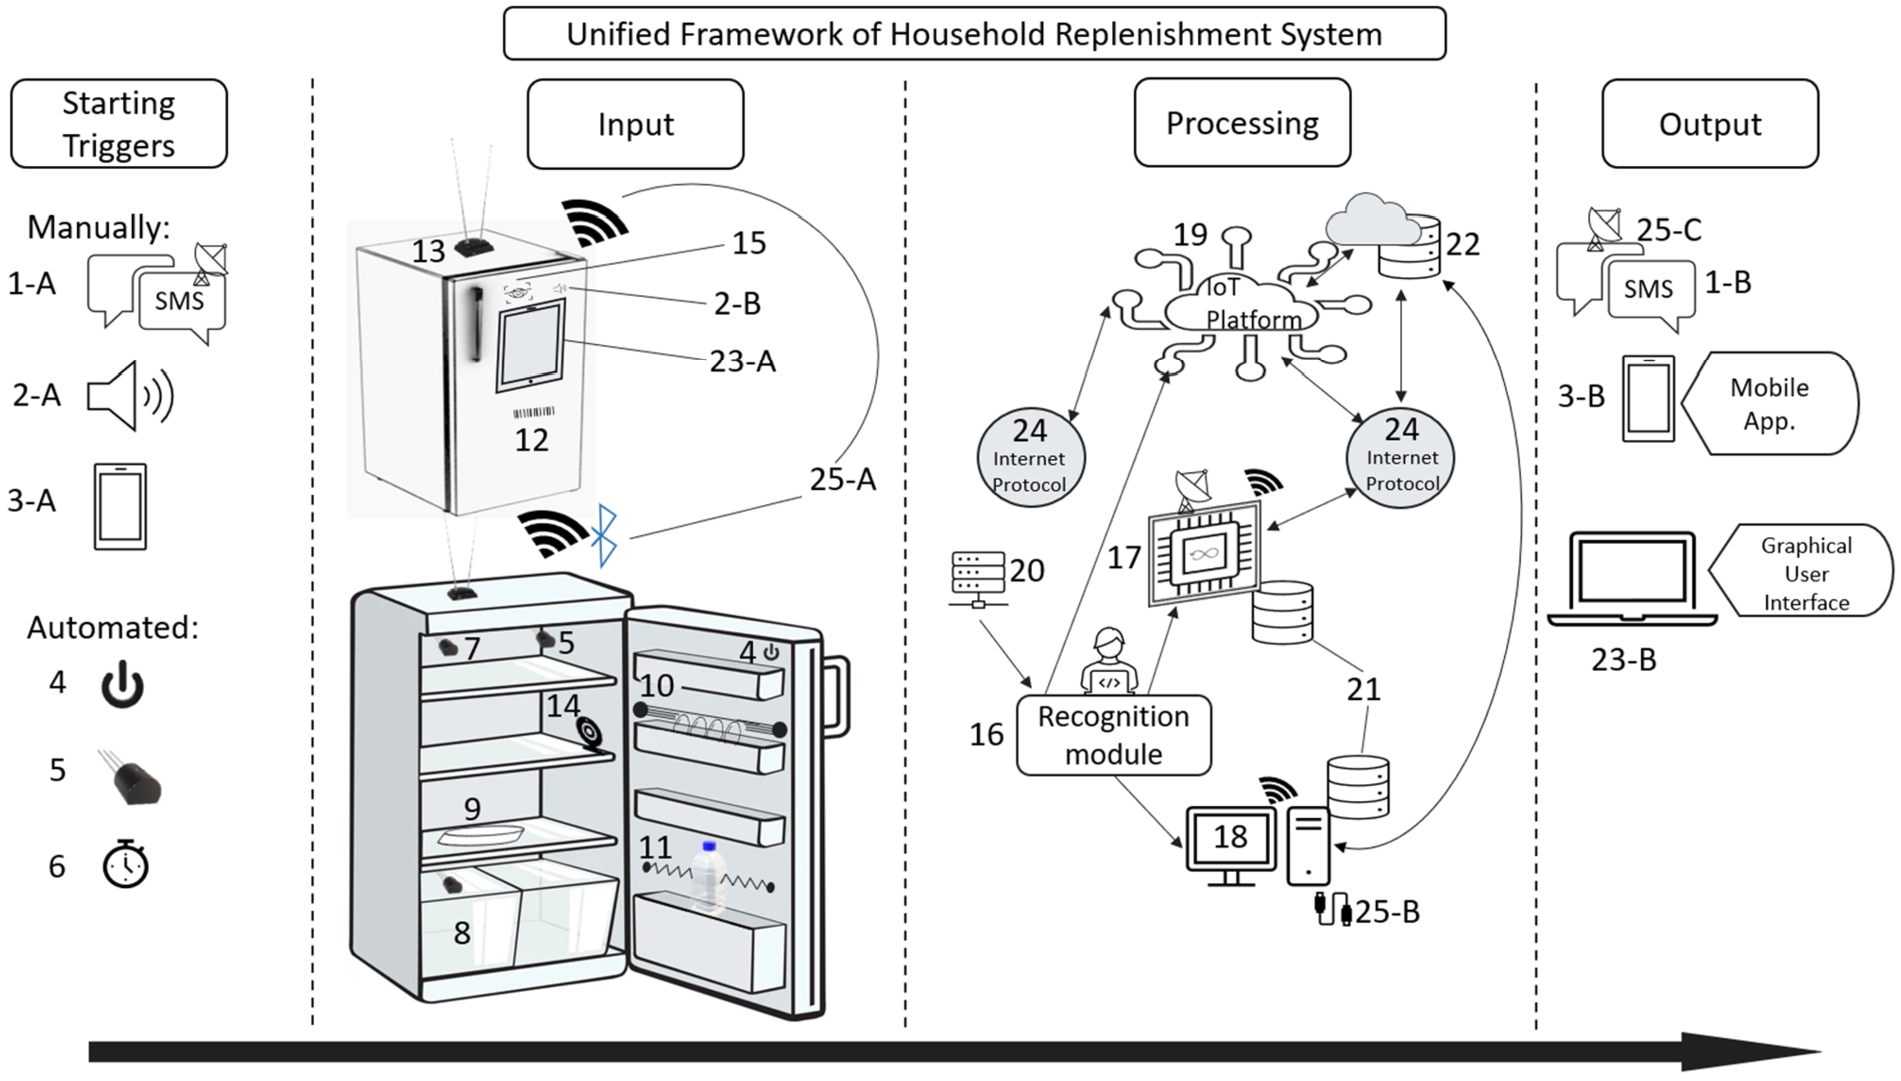 A unified framework for household replenishment system.